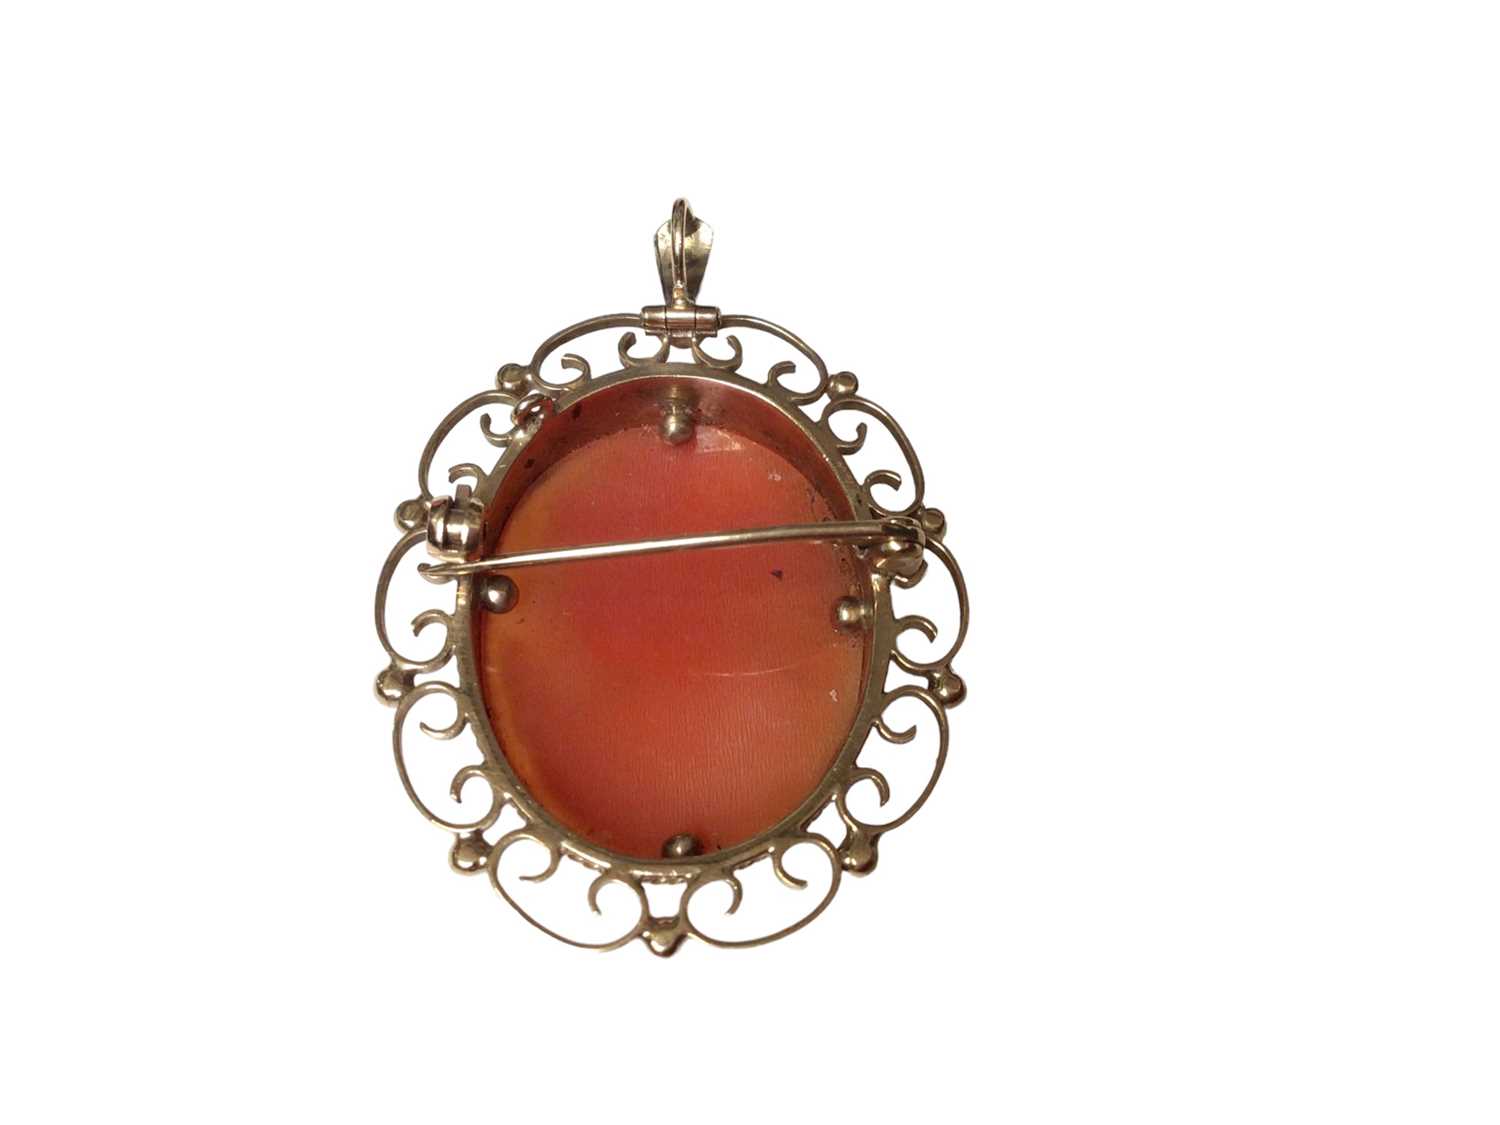 Carved shell cameo pendant/brooch in 9ct gold mount, 45mm. - Image 2 of 2